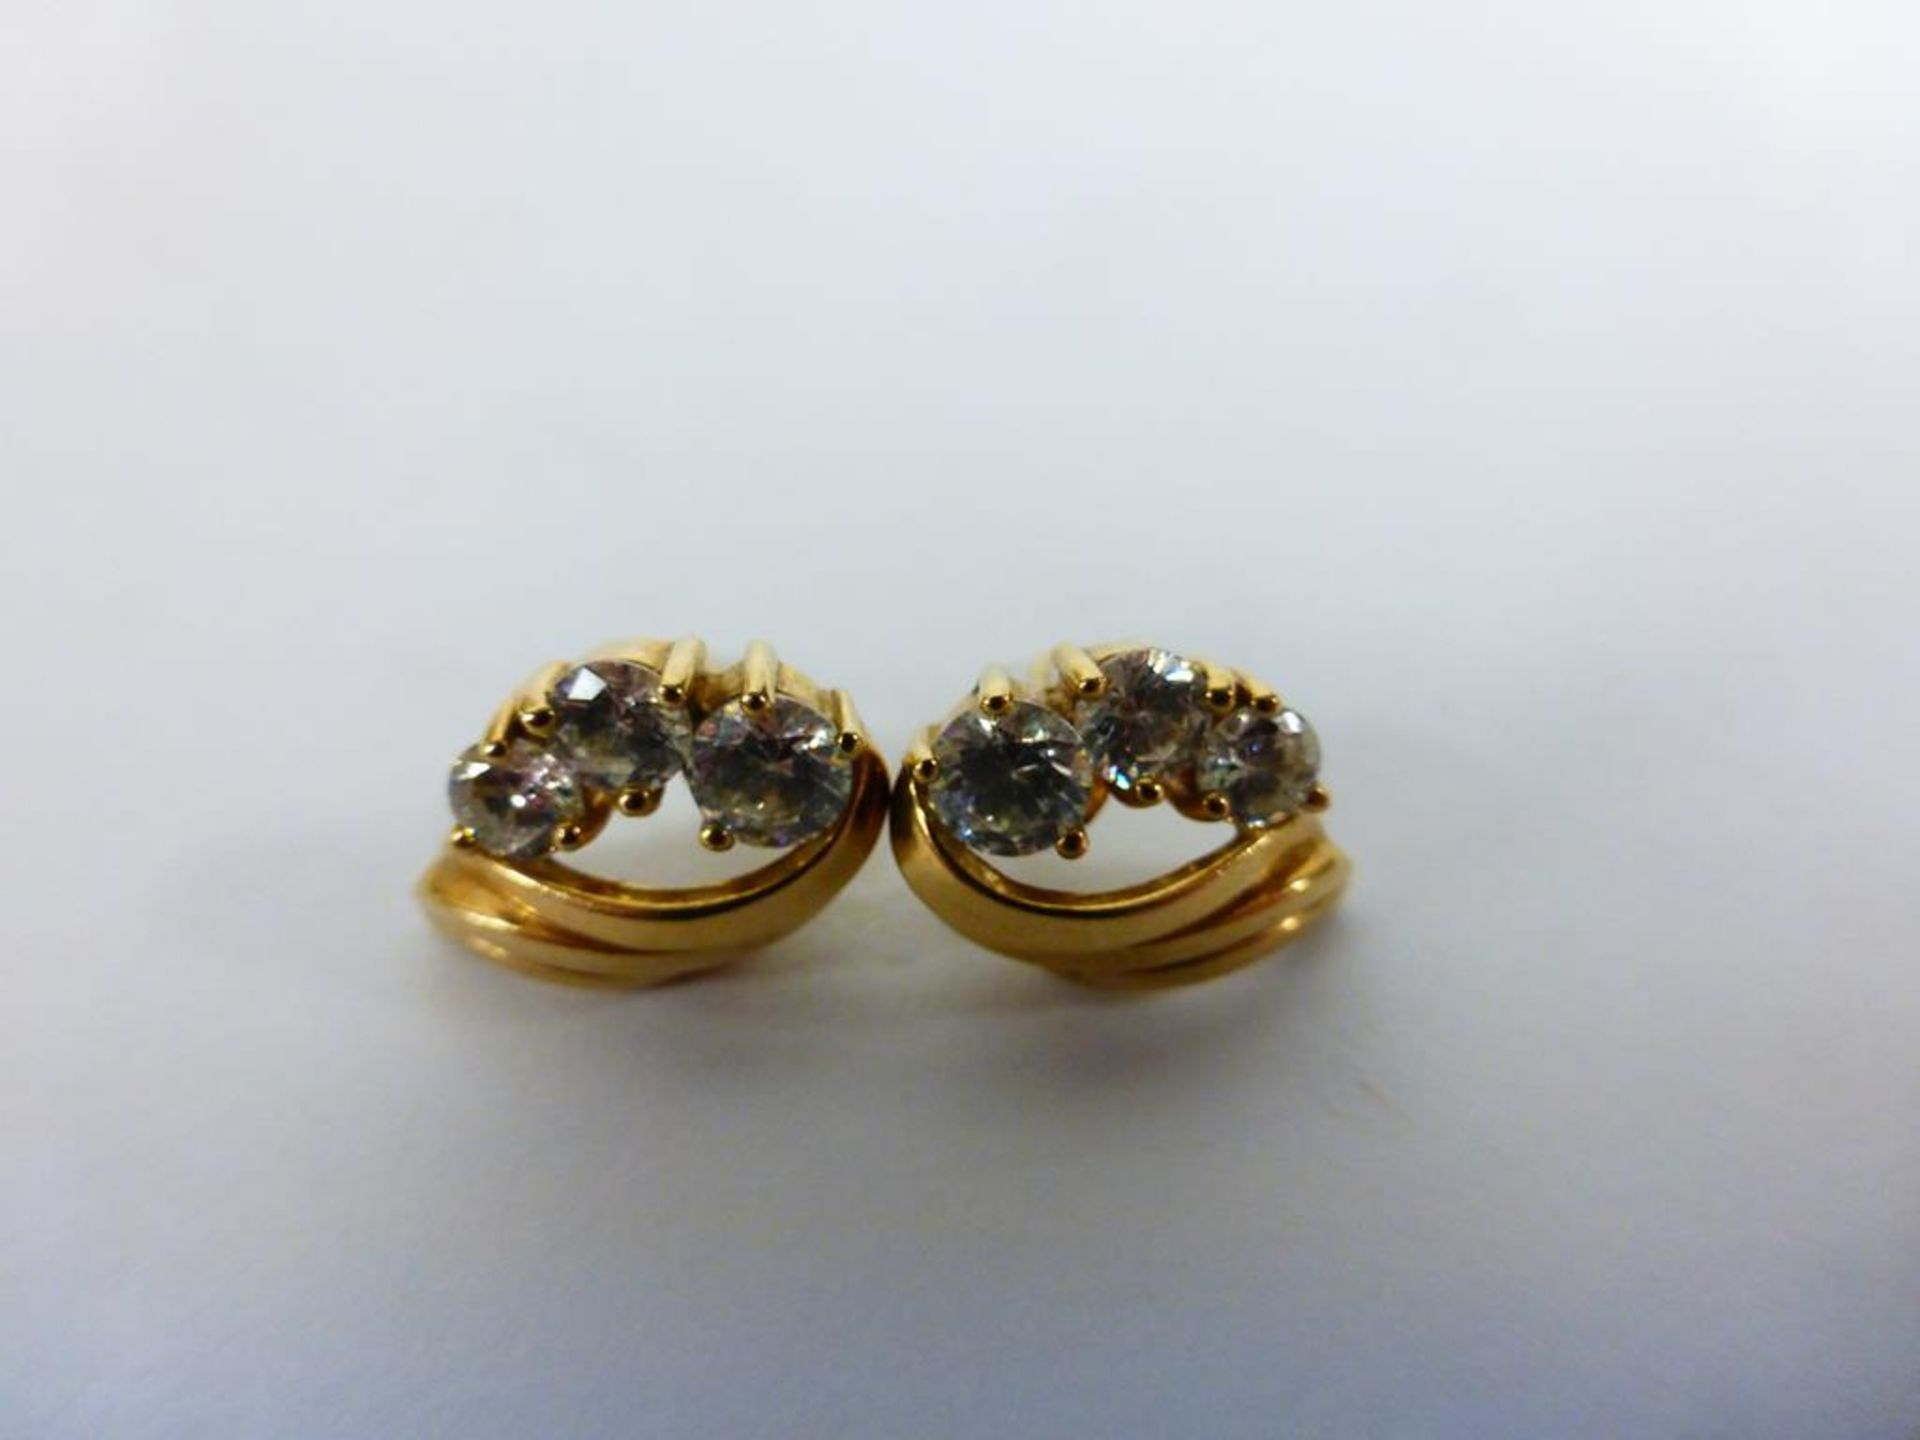 2 x Pair of 9ct Gold Earrings - Image 4 of 4